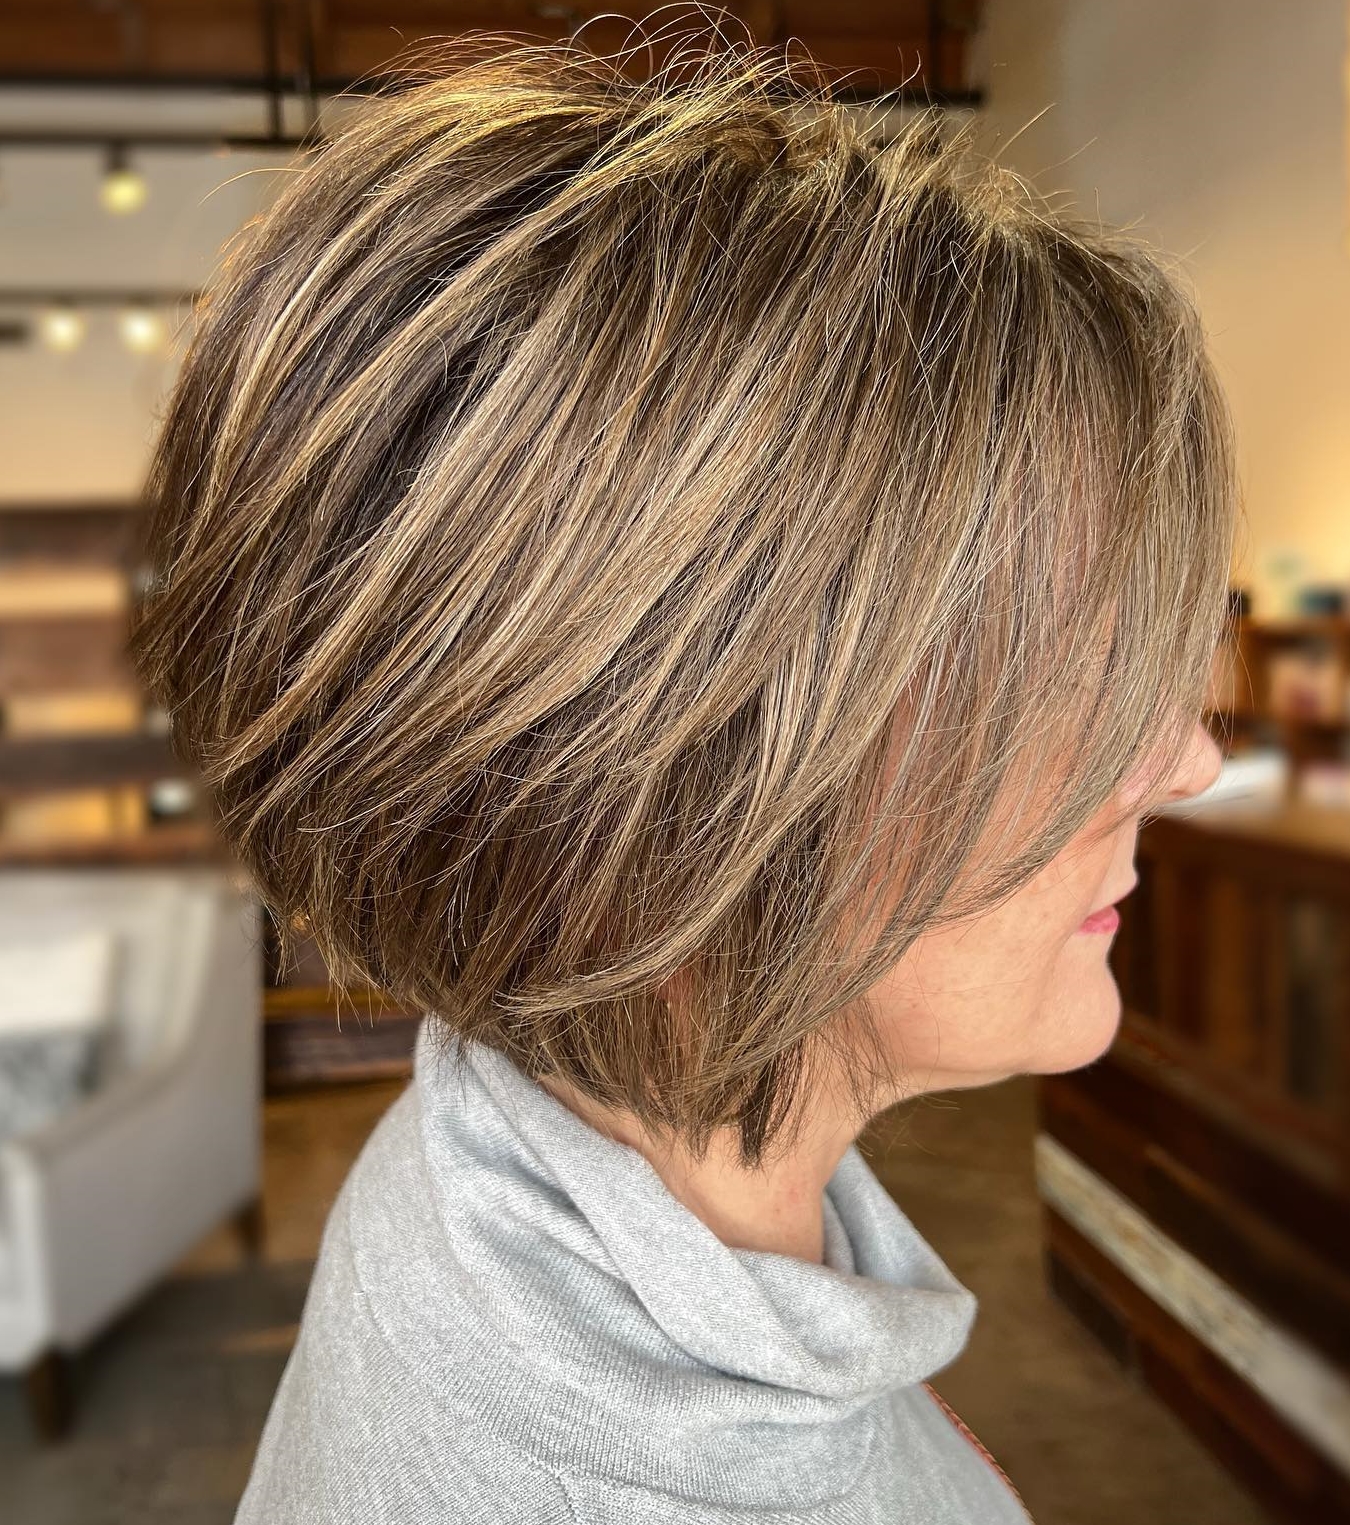 Top Hair Styles For Ladies Over 50